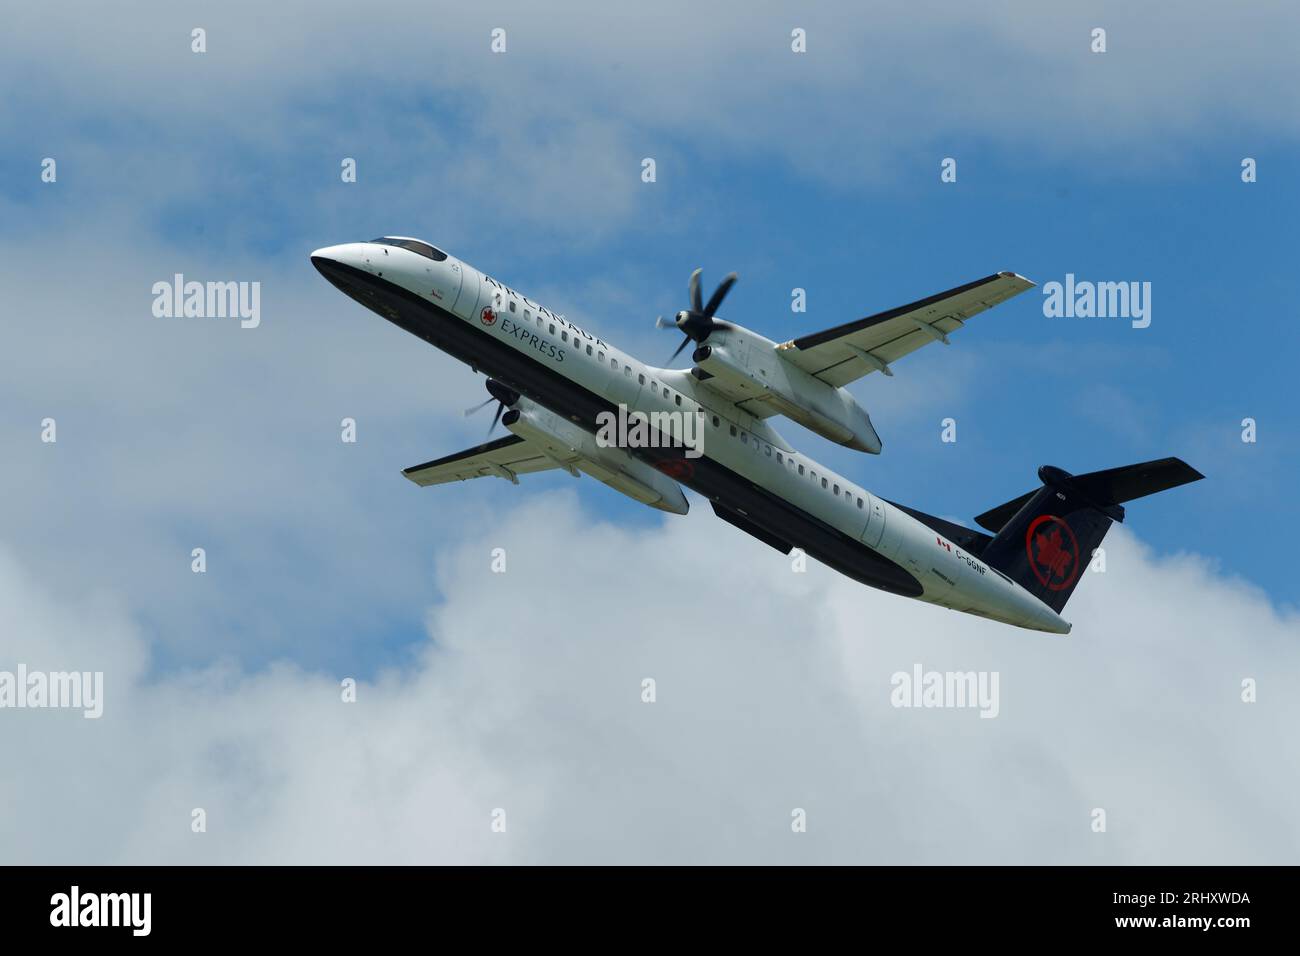 Air Canada Express Bombardier Q400 Dash 8 aircraft in flight. Montreal,Quebec,Canada Stock Photo